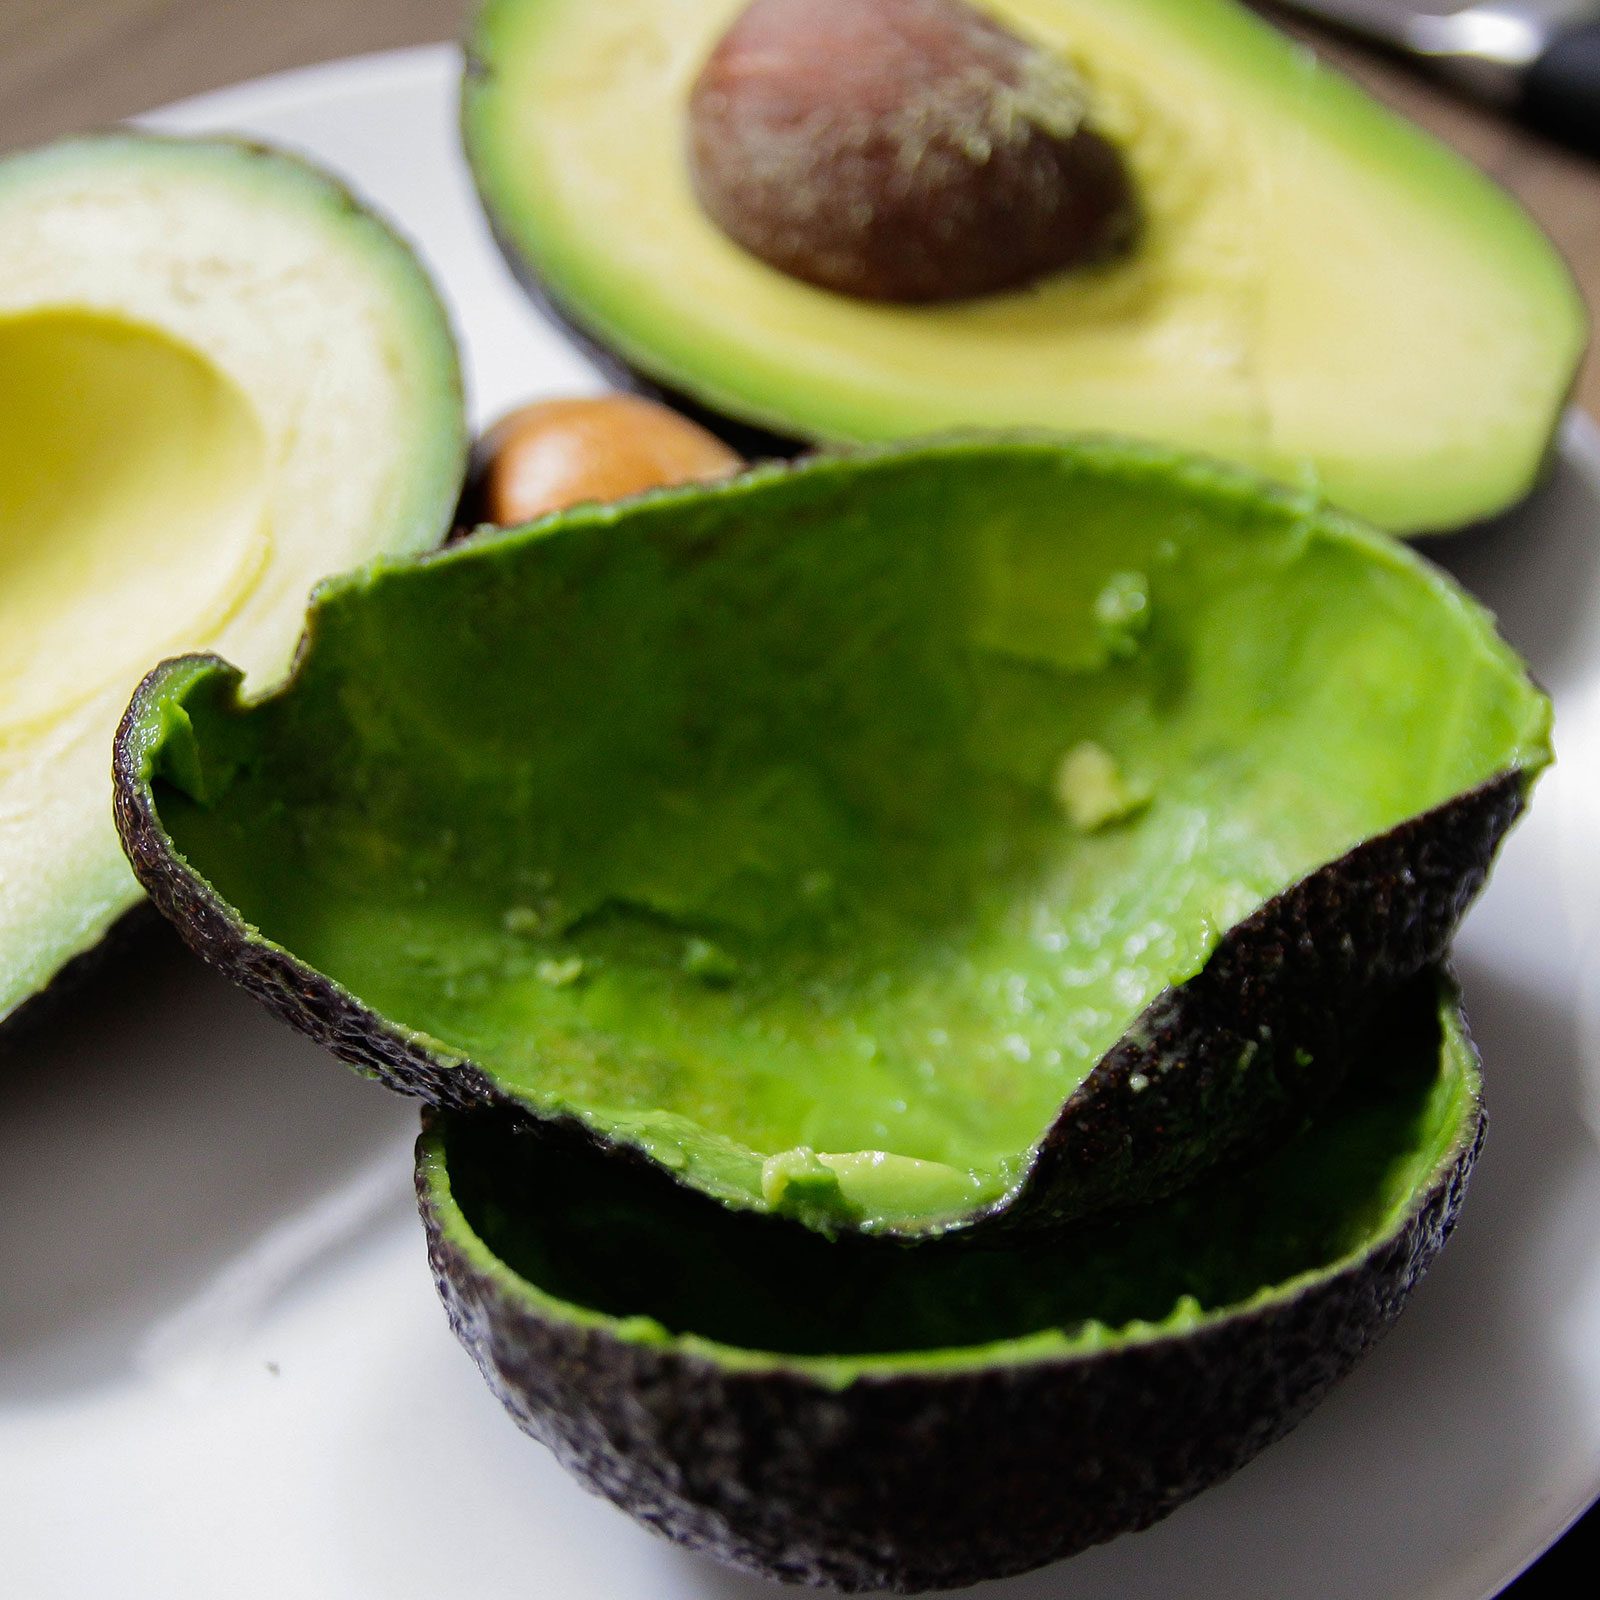 Avocado Skins and Pit on a plate out of focus on a bright background